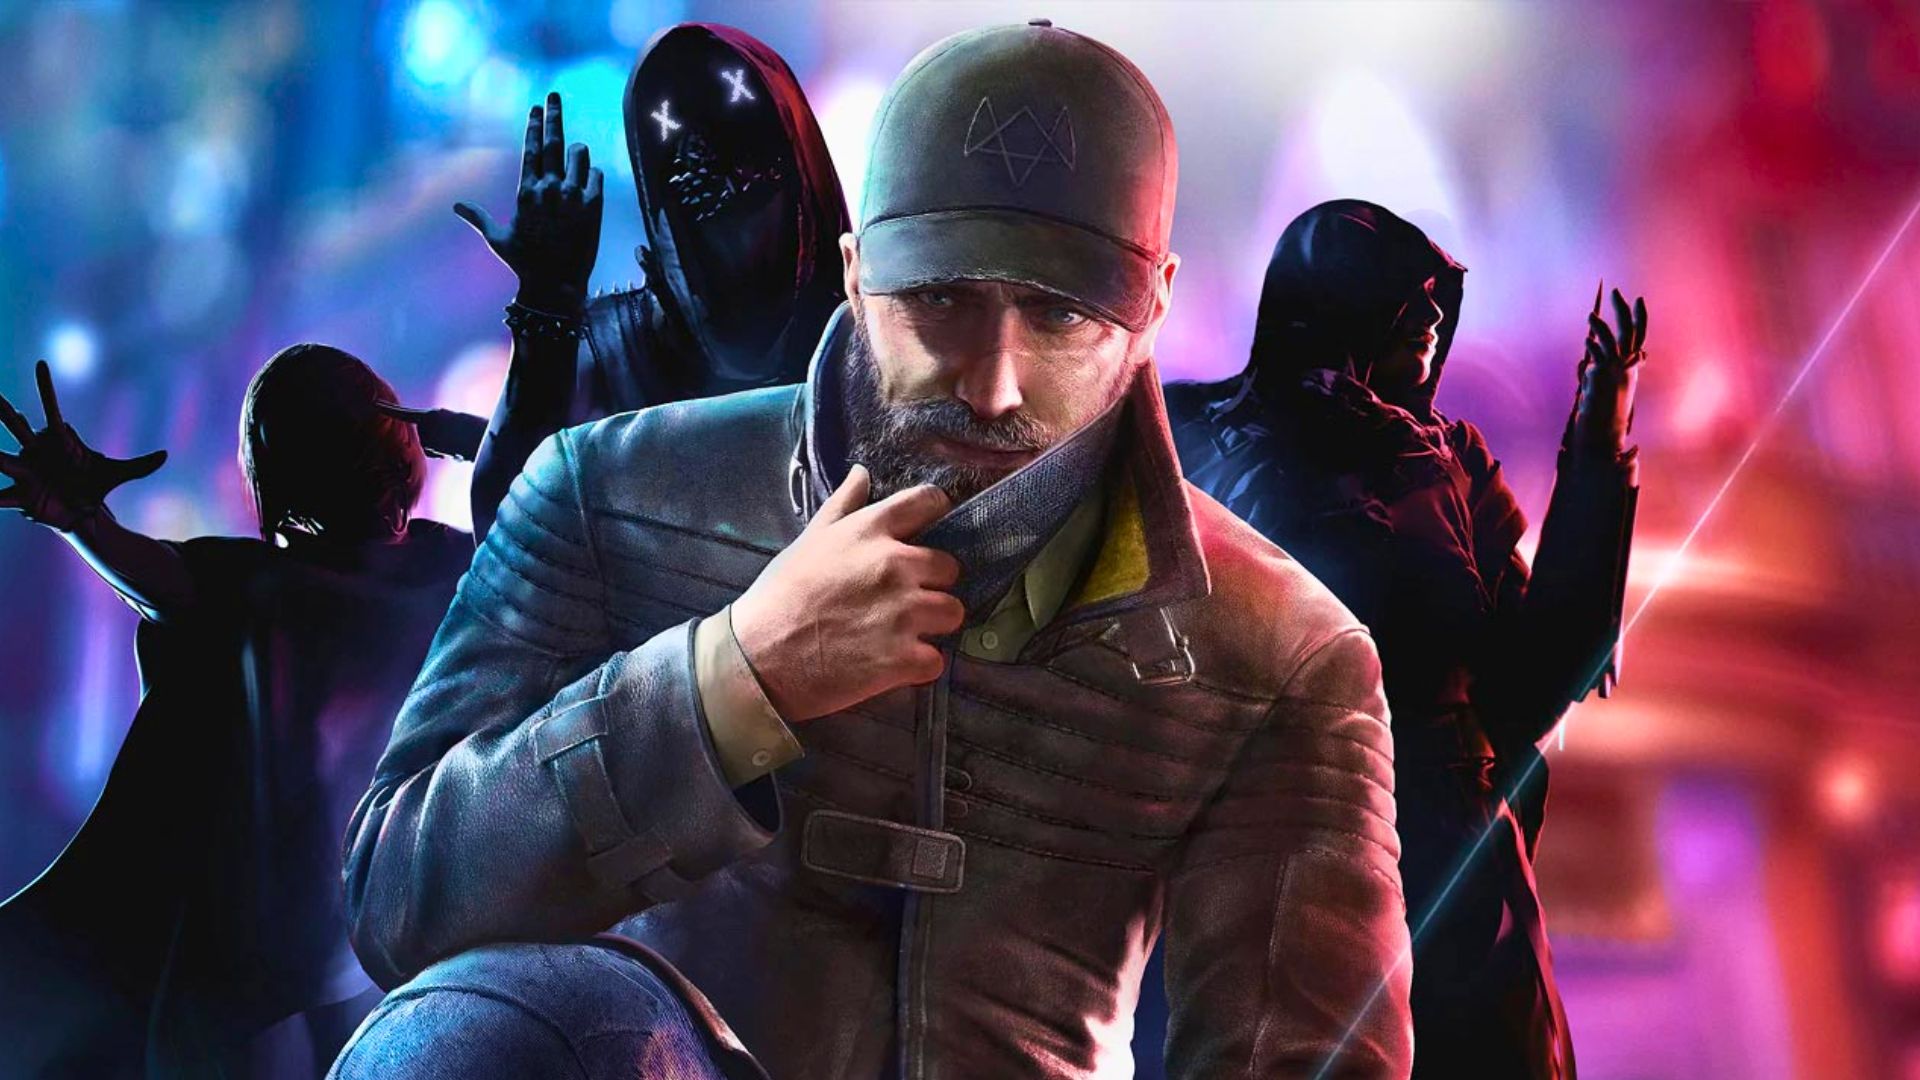 Watch Dogs is getting a movie, and it might actually be good